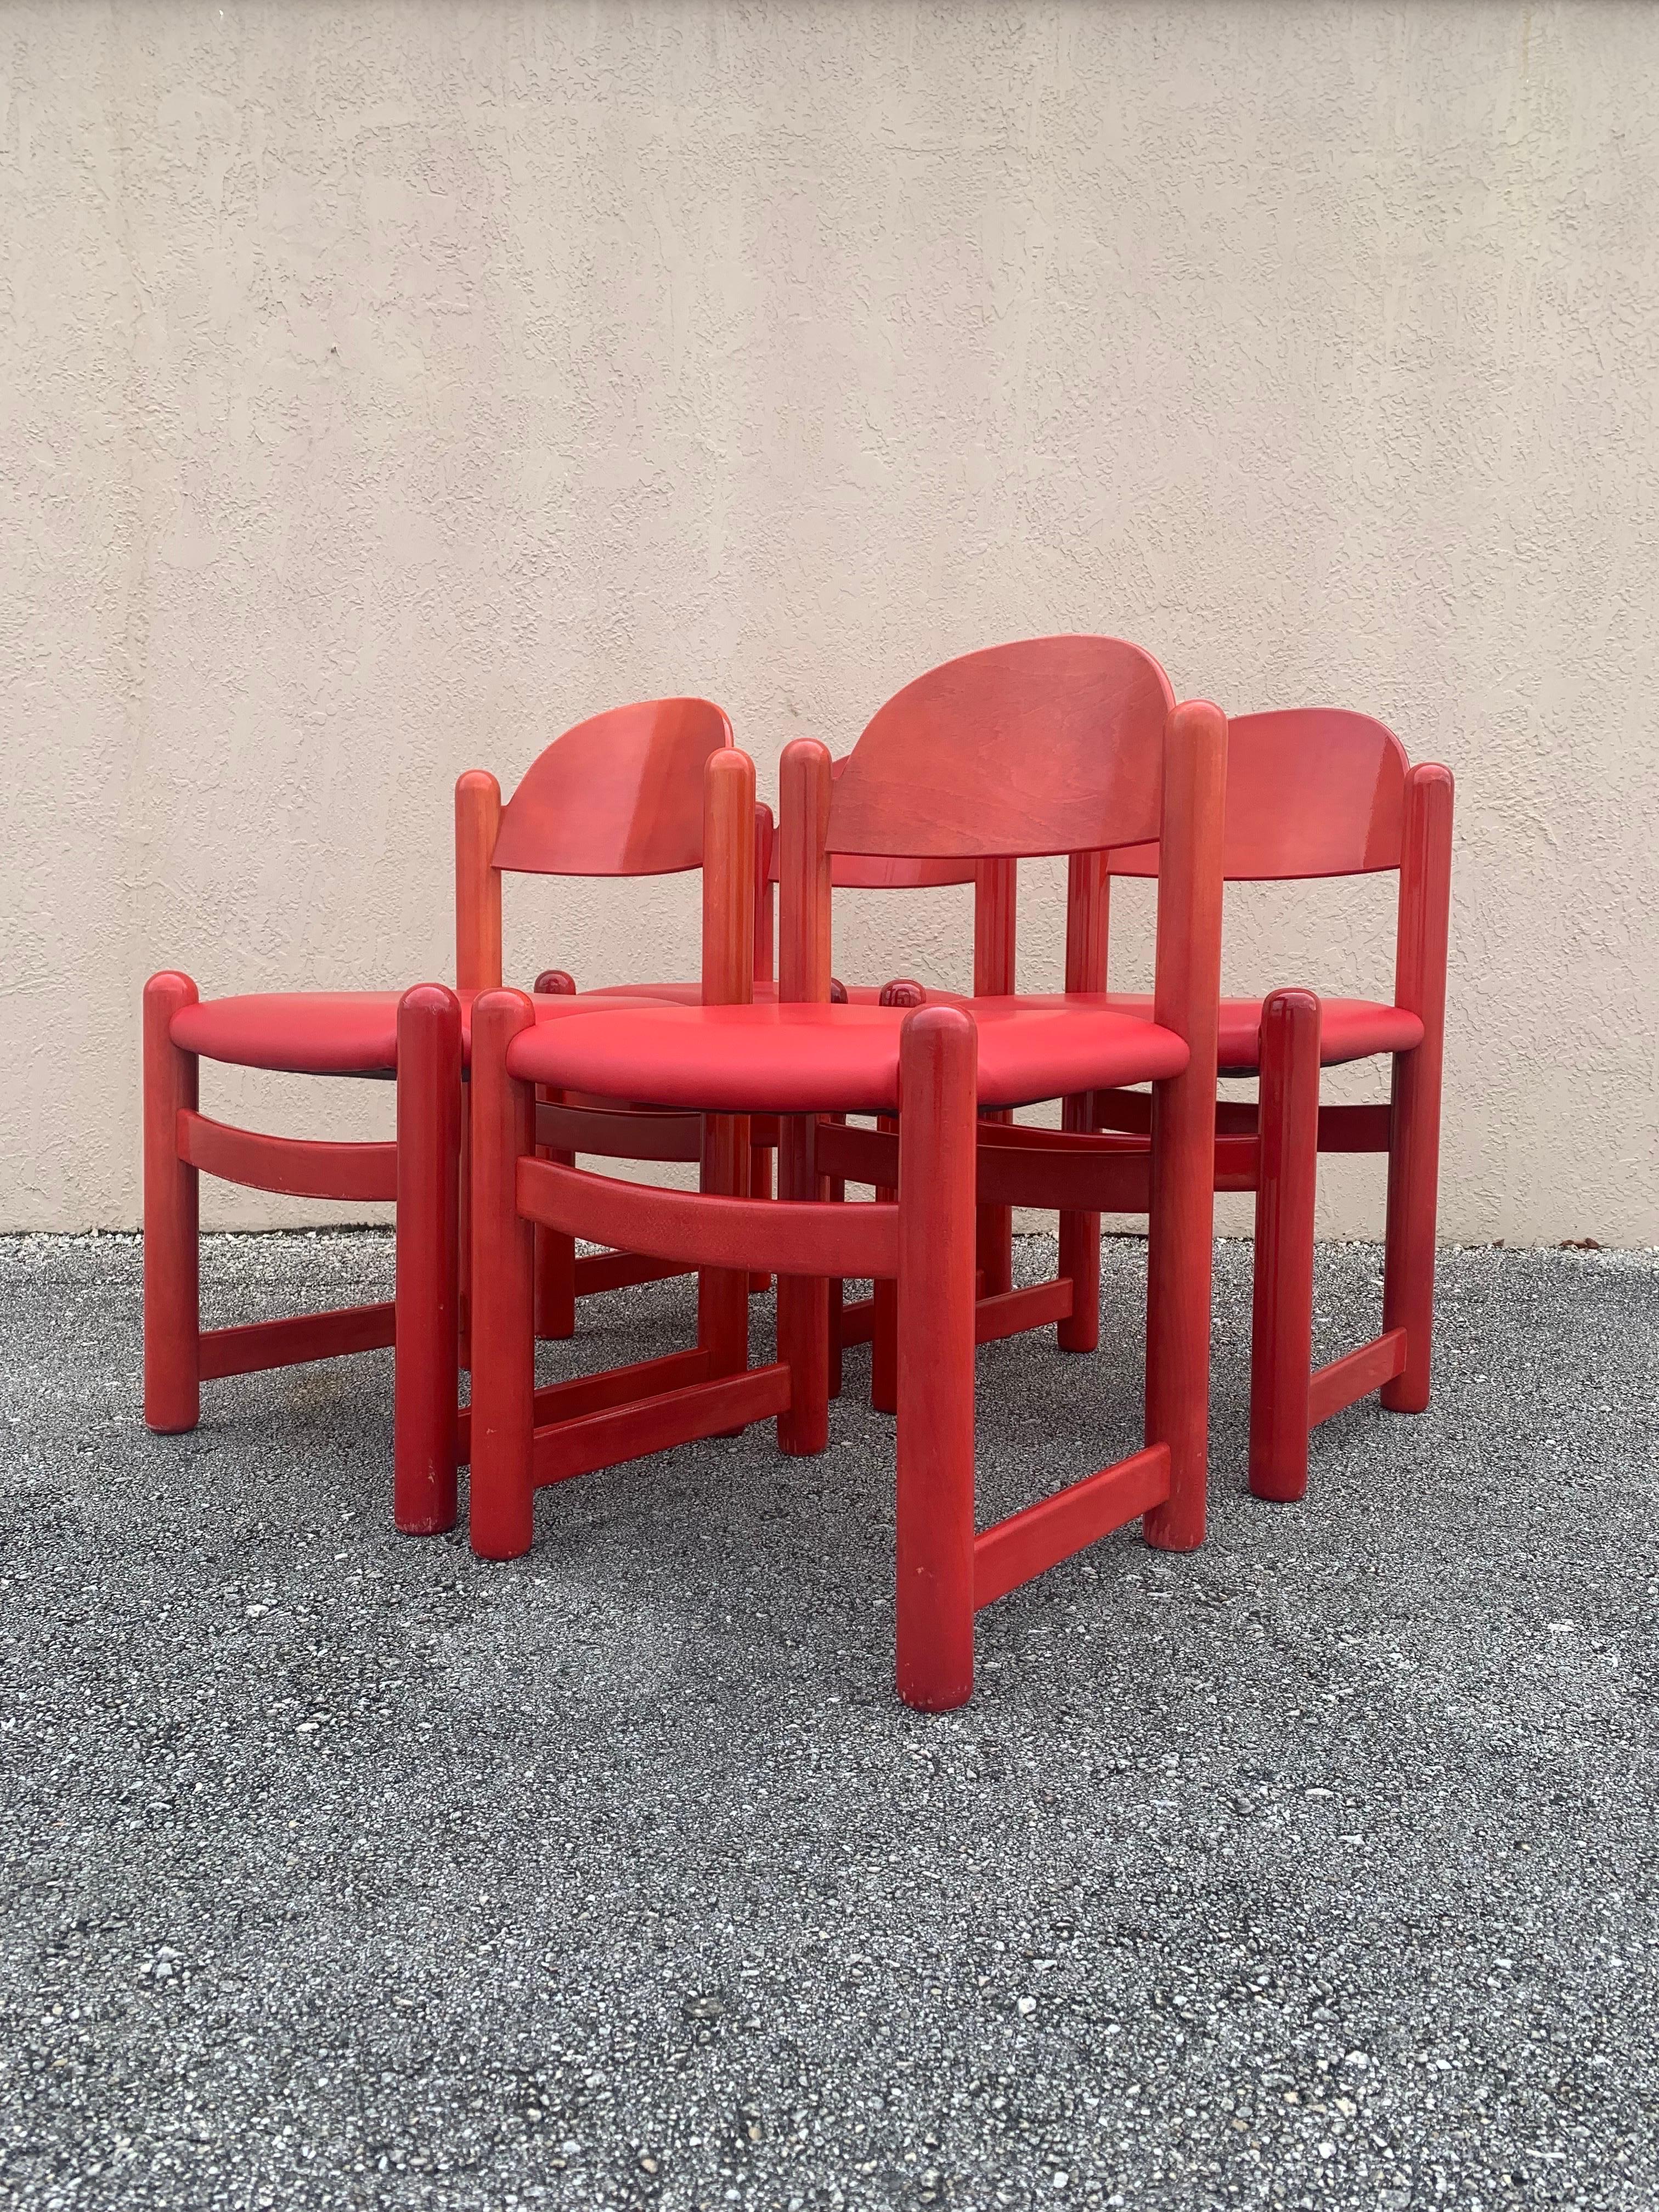 Hank Lowenstein “Padova” dining chairs in oak and leather. Finished in a beautiful vibrant red lacquer with red leather seats. Will add a lively pop of color to any dining room or breakfast nook.

In good vintage original condition with light signs